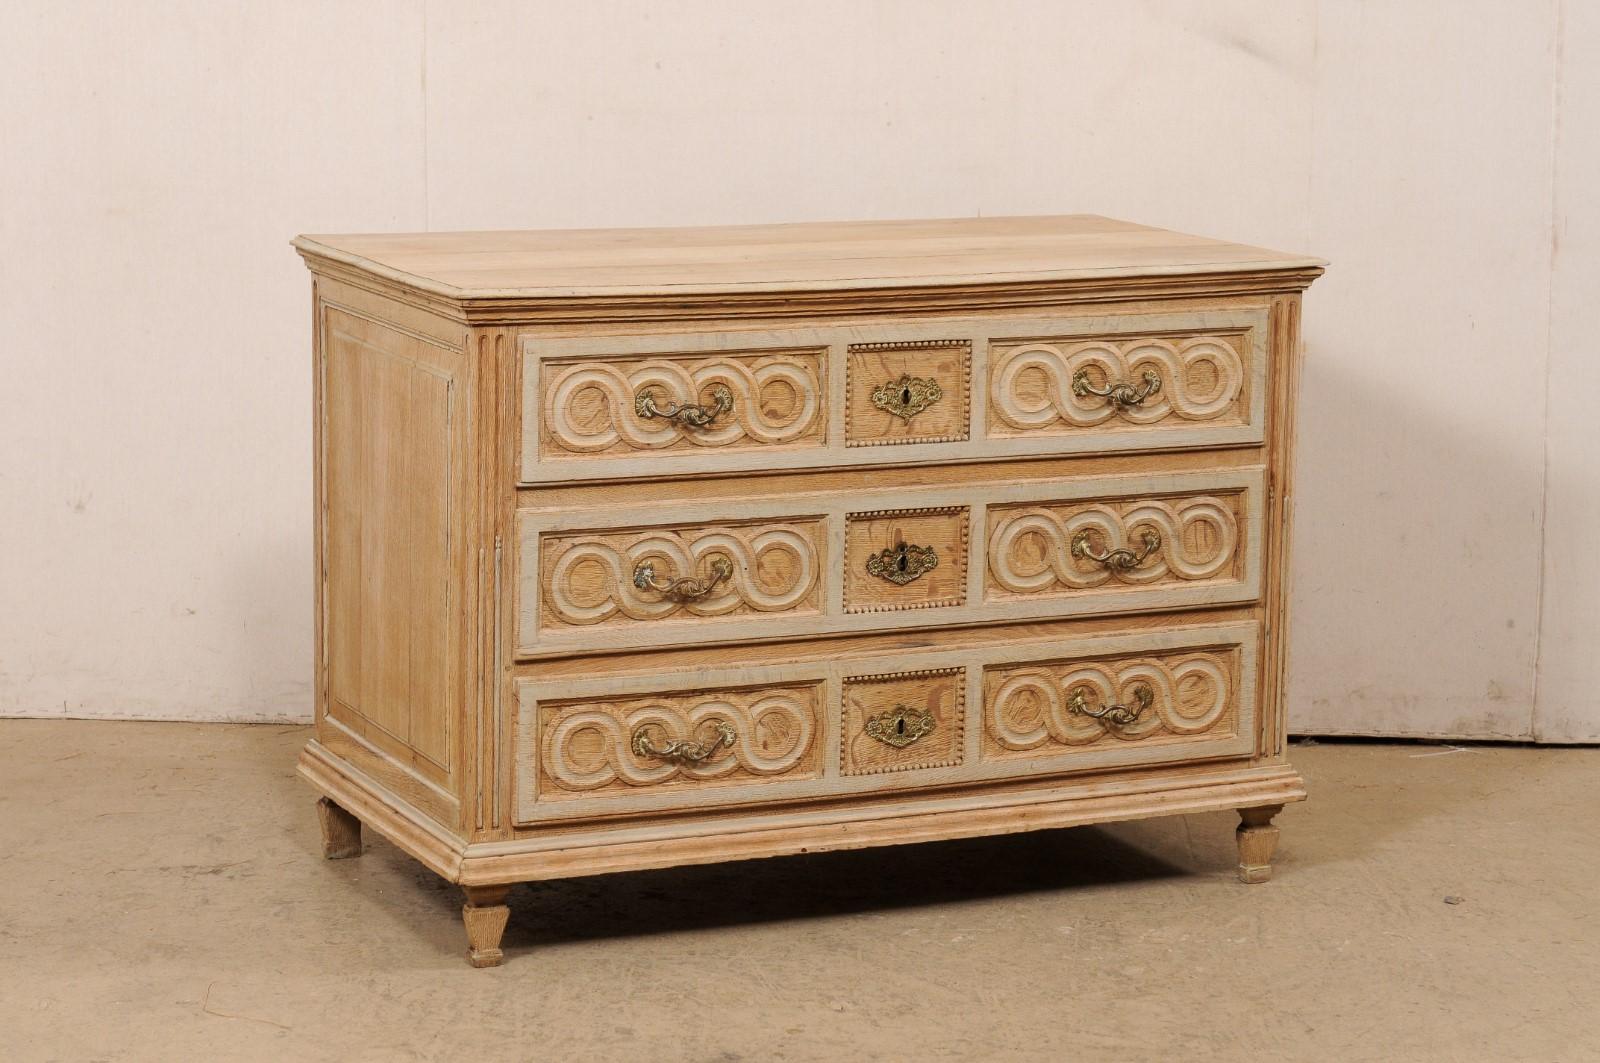 A French carved and bleached wood chest of drawers from the 19th century. This antique commode from France has a rectangular-shaped top over a case which houses three full-sized drawers framed within fluted front side-posts, and presented upon